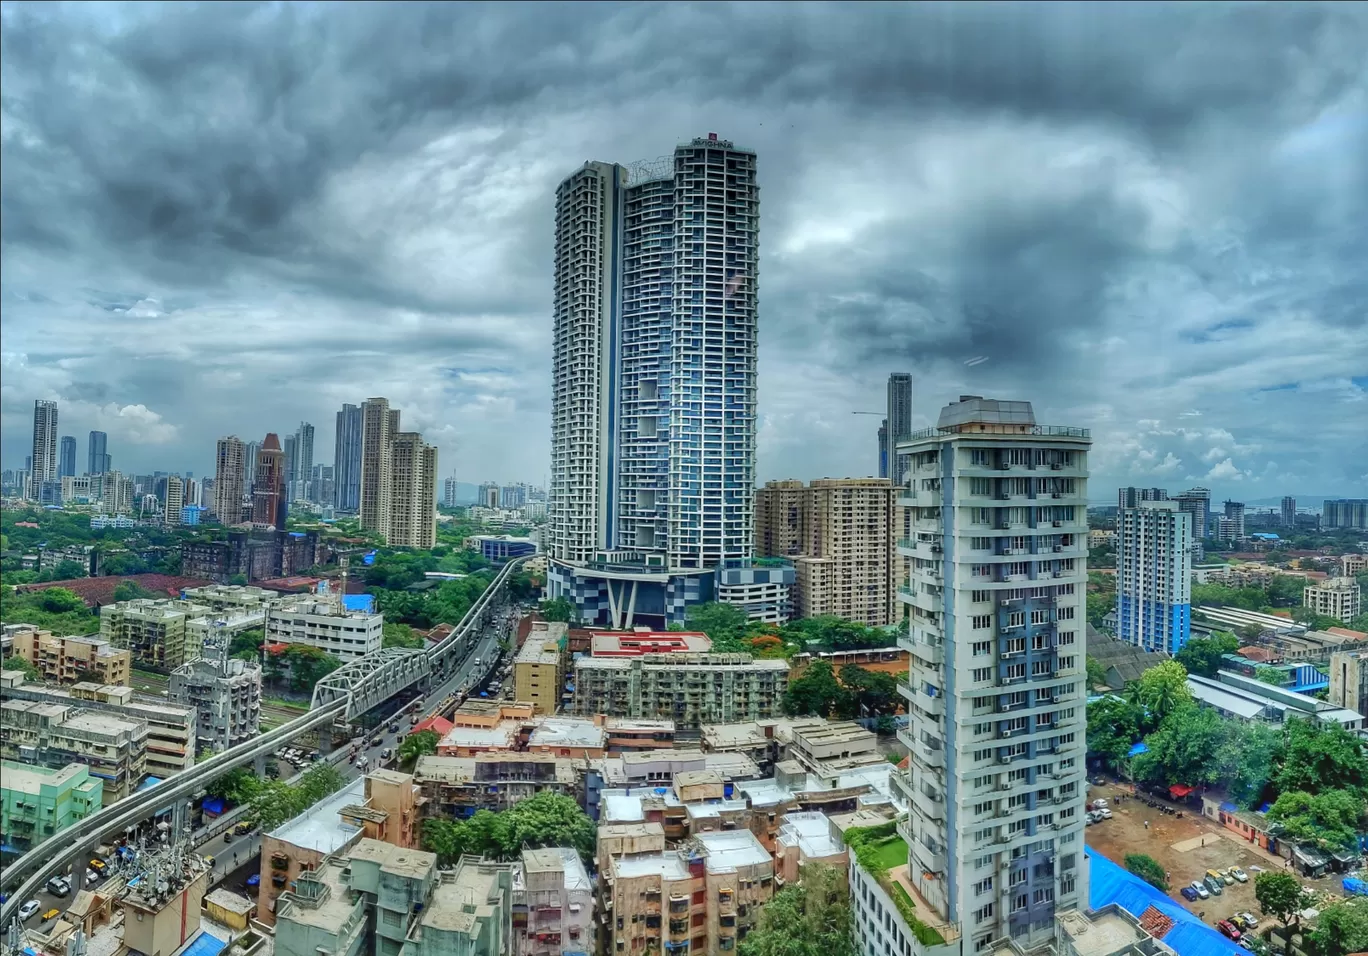 Photo of Lower Parel By Arun Nair